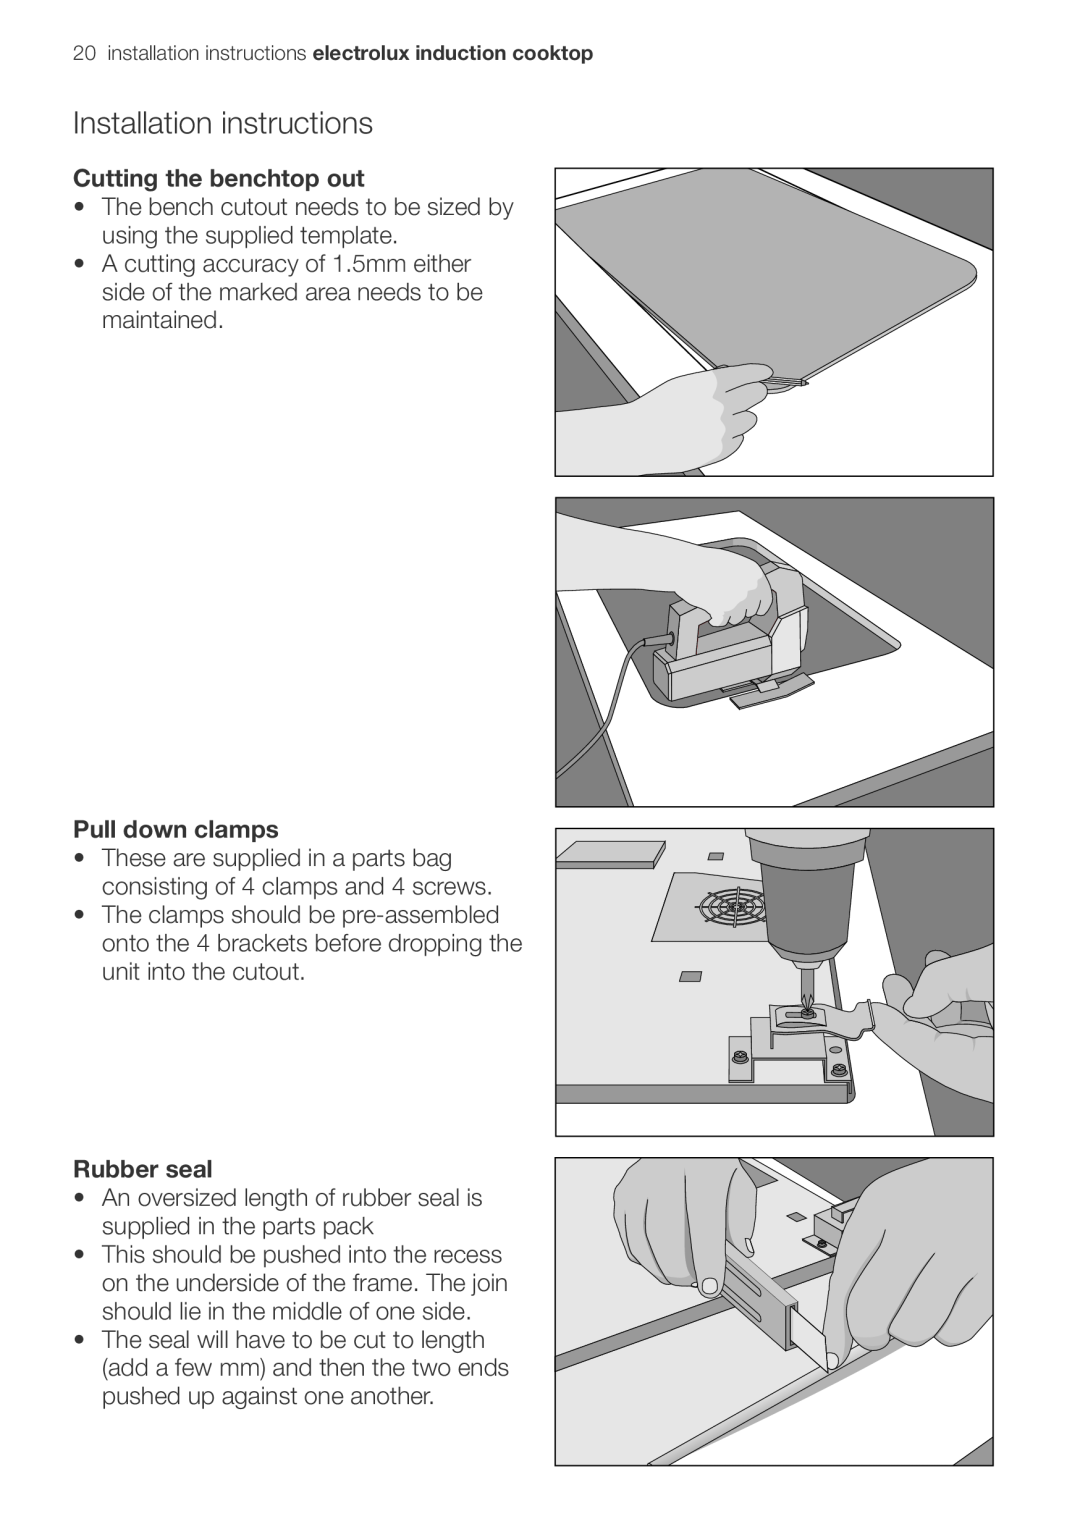 Electrolux EHD90LLUM Installation instructions, Cutting the benchtop out, Pull down clamps, Rubber seal 